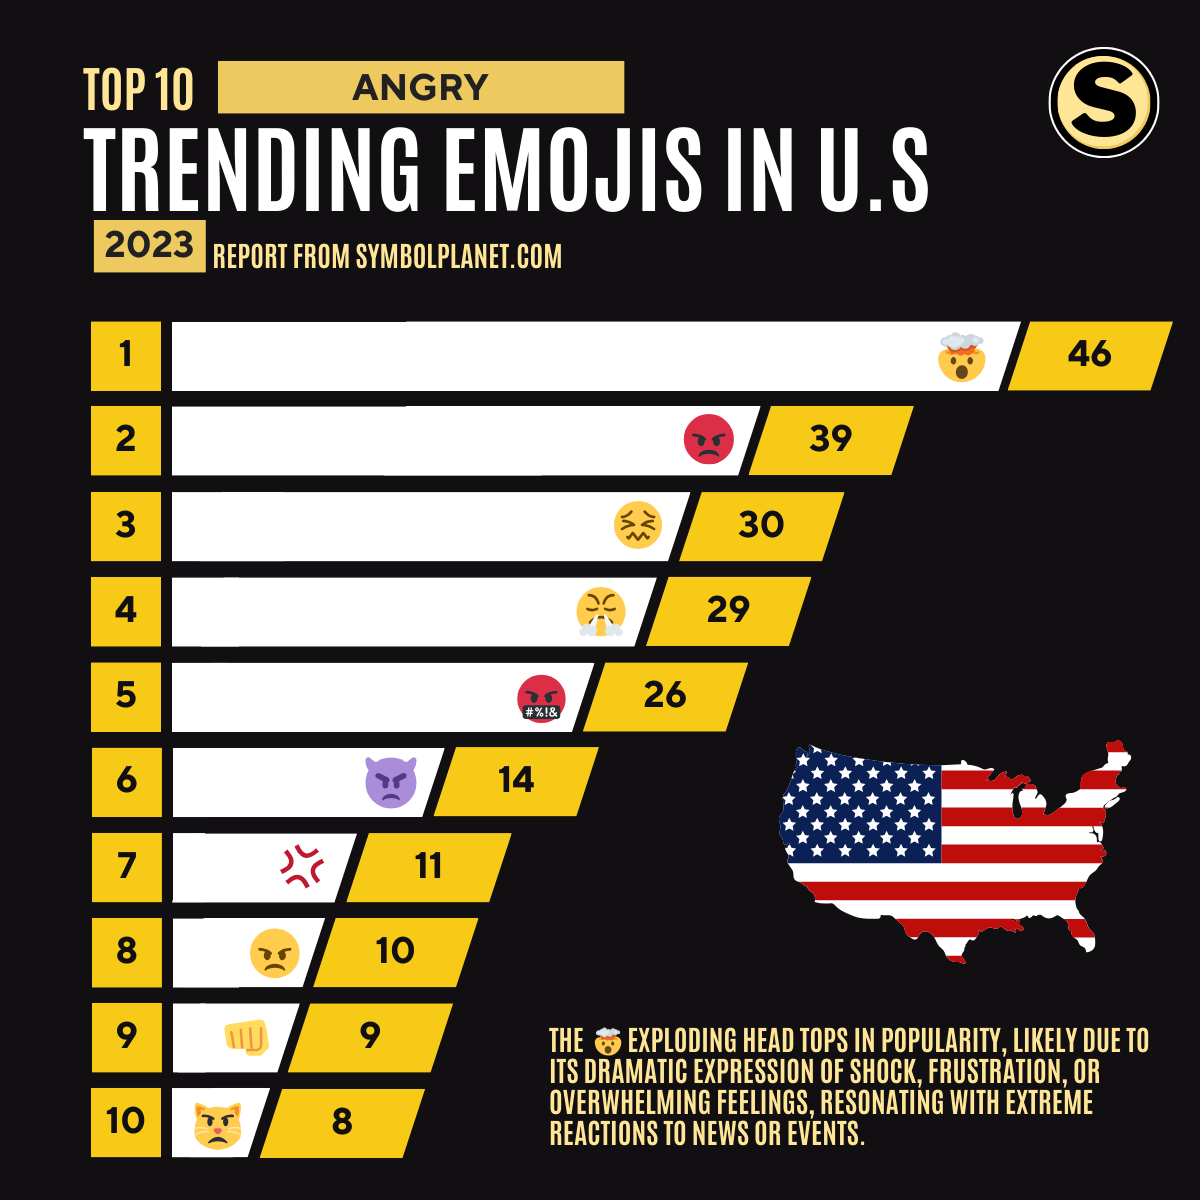 Top 10 Trending Angry Emojis of 2023 in the United States